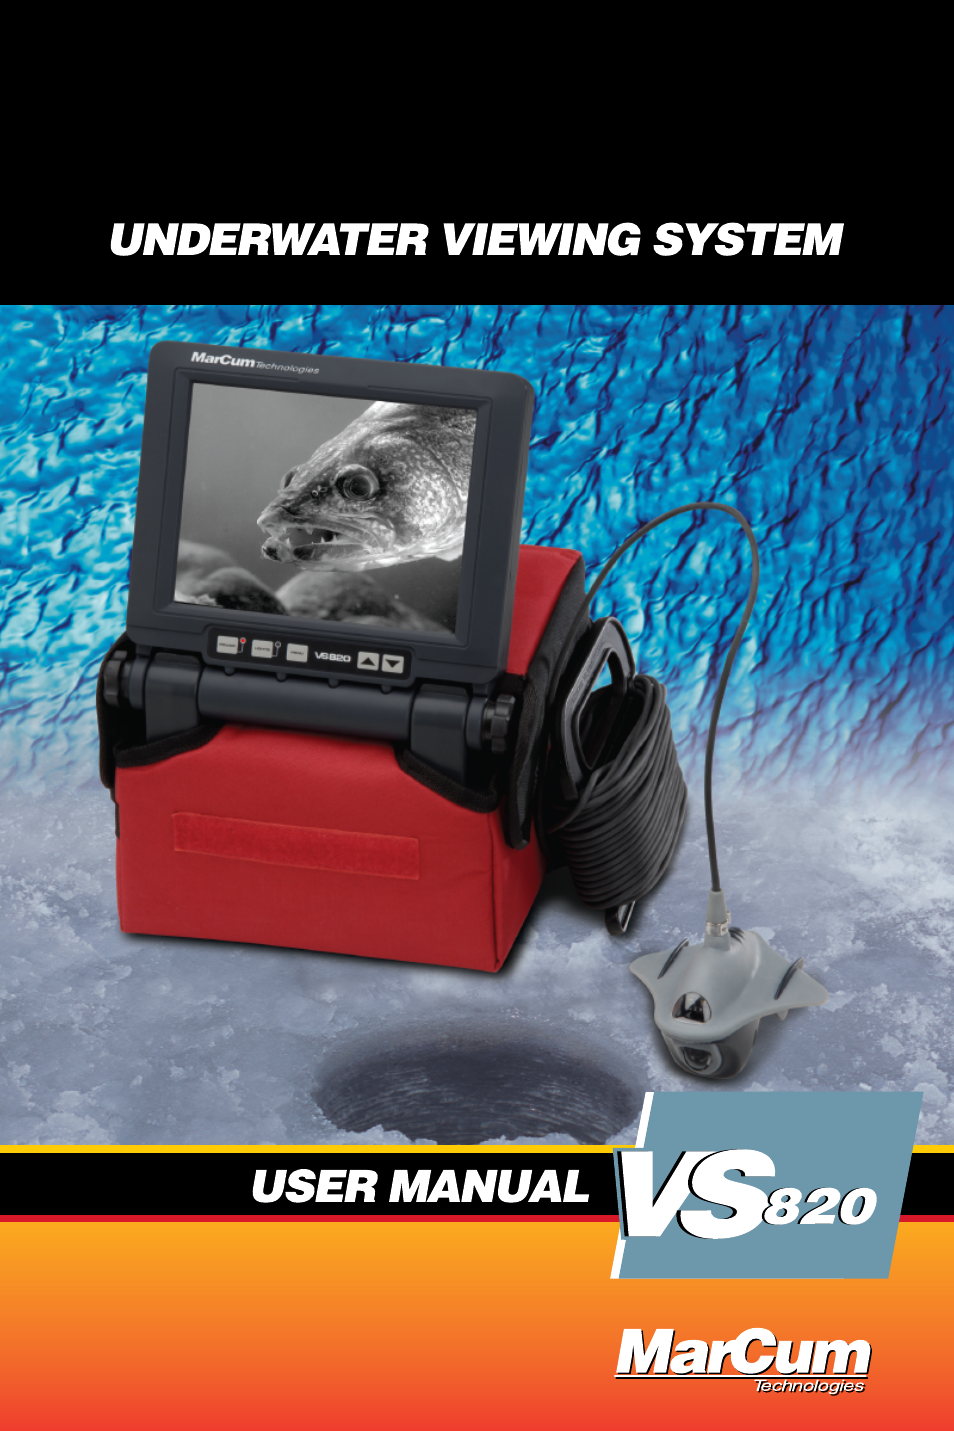 Underwater Viewing System VS820